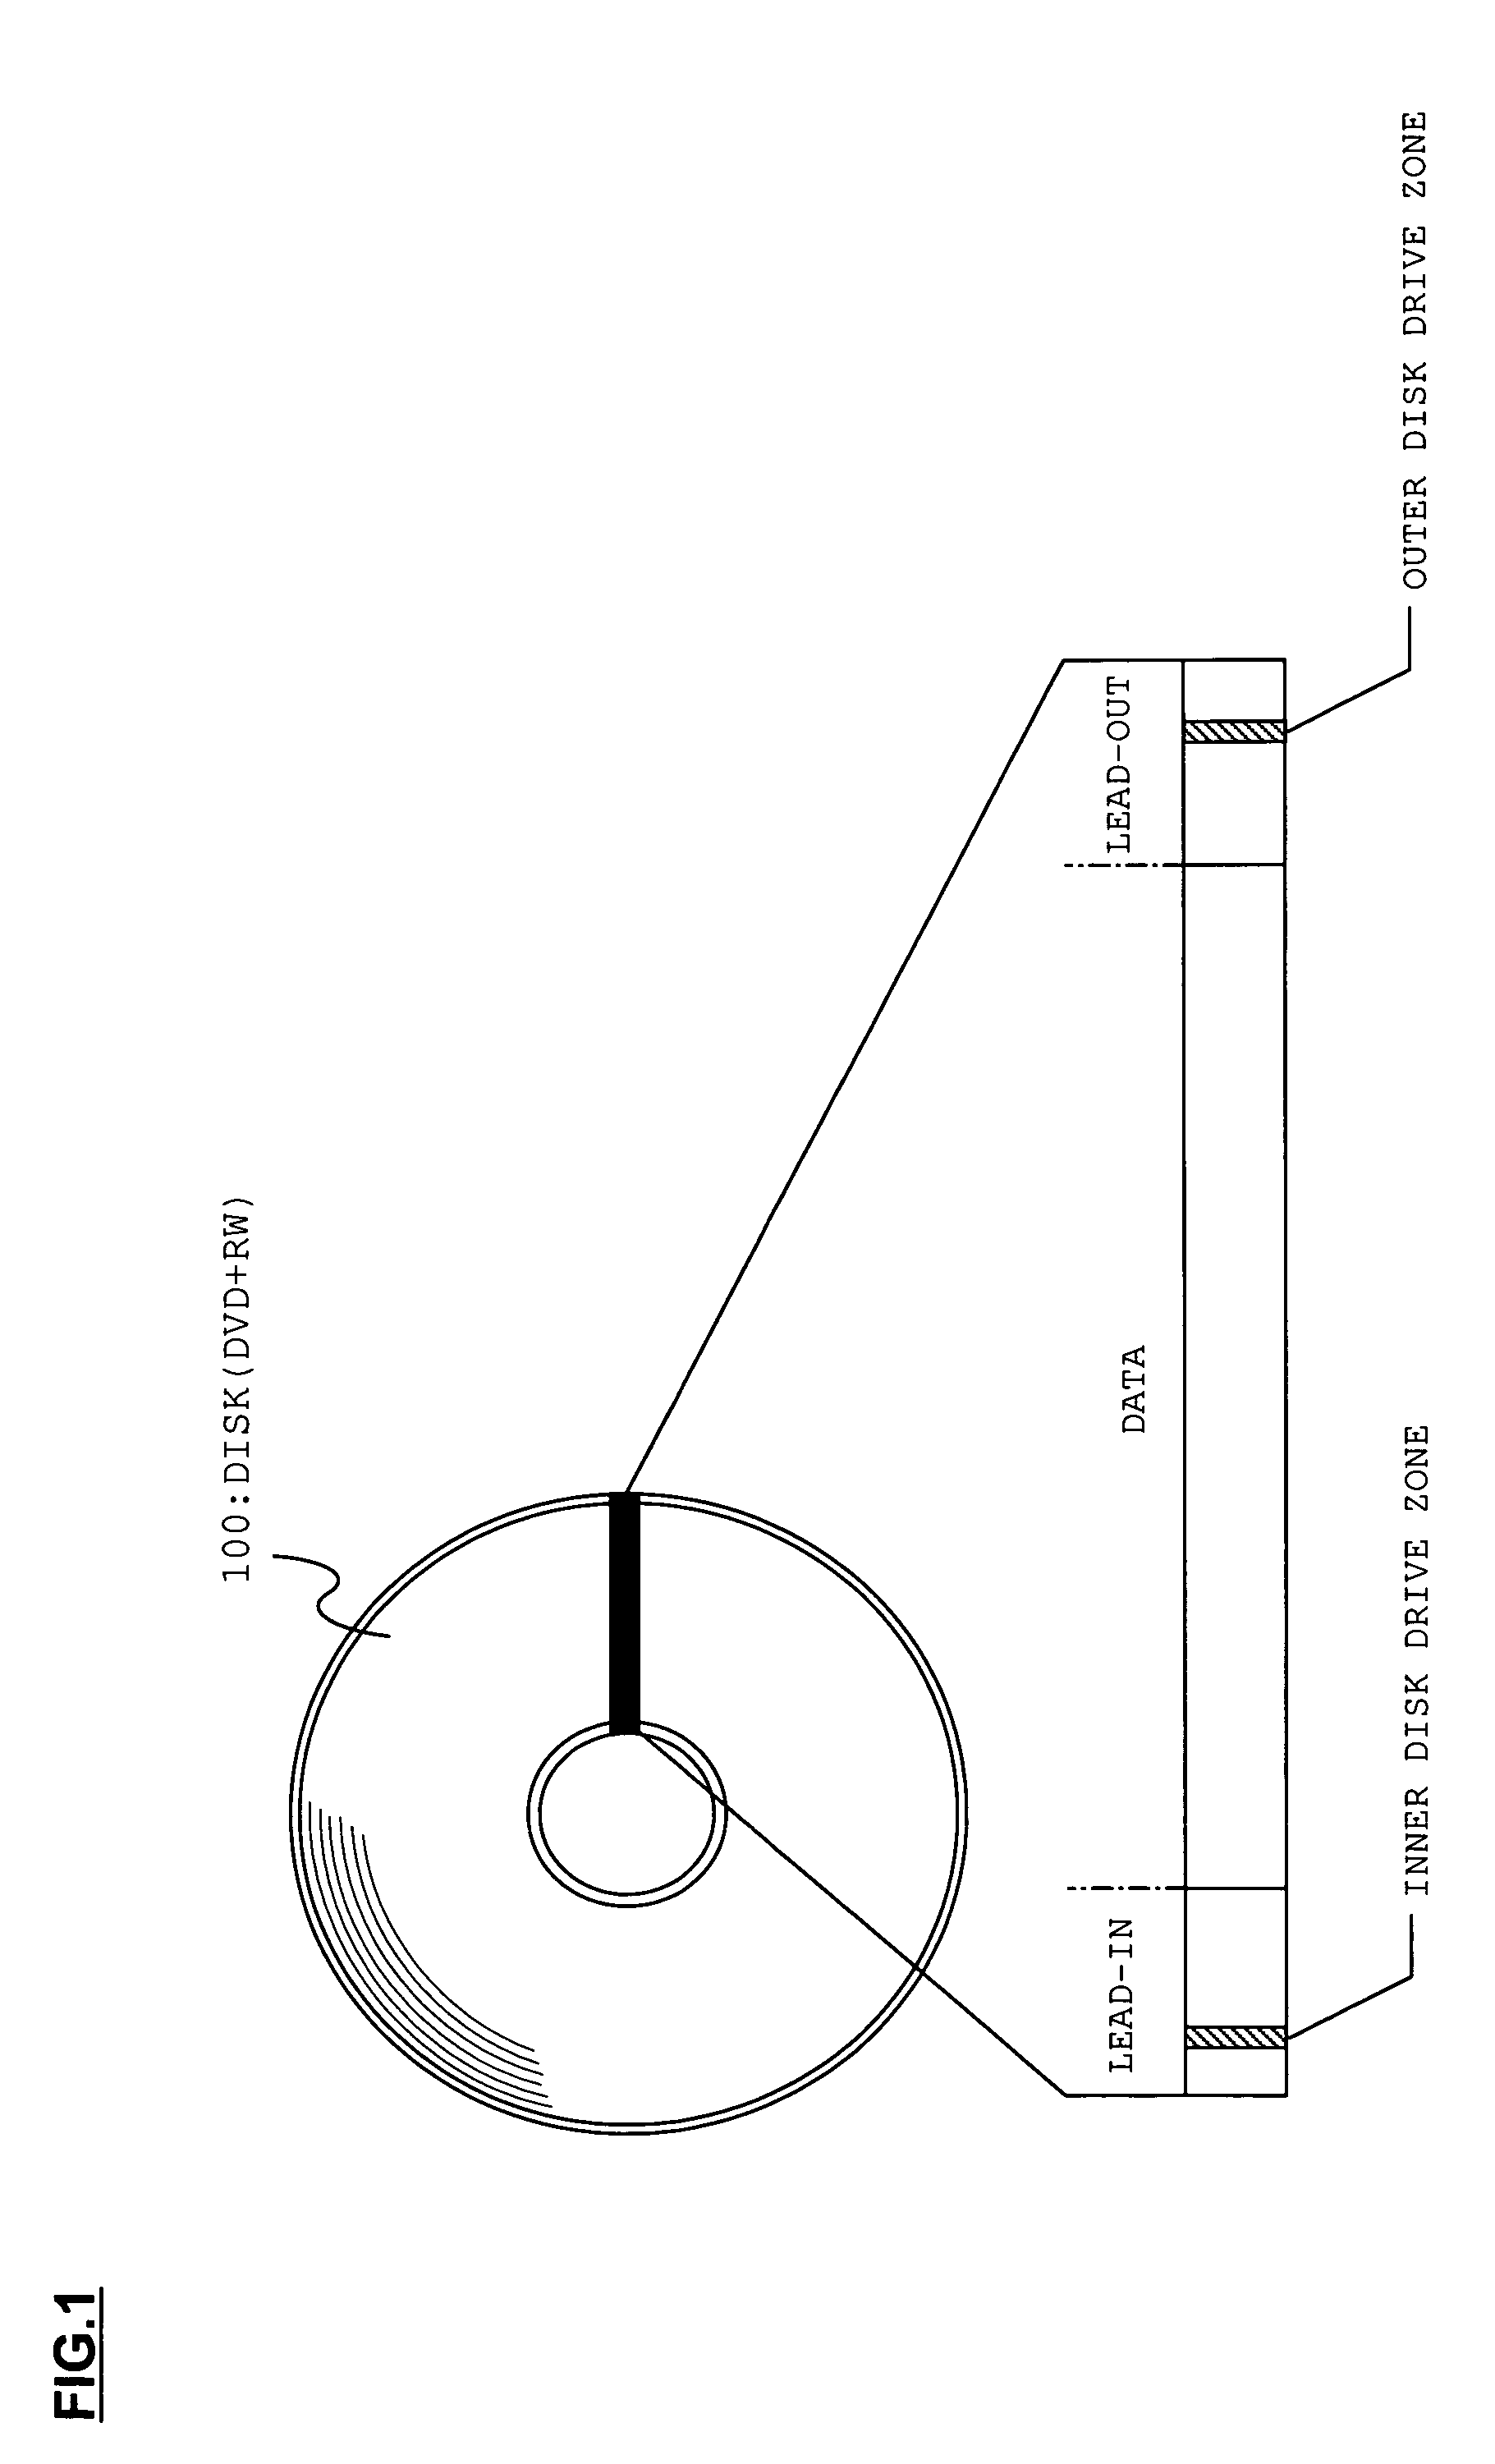 Laser power adjustment method and optical recording and reproduction apparatus